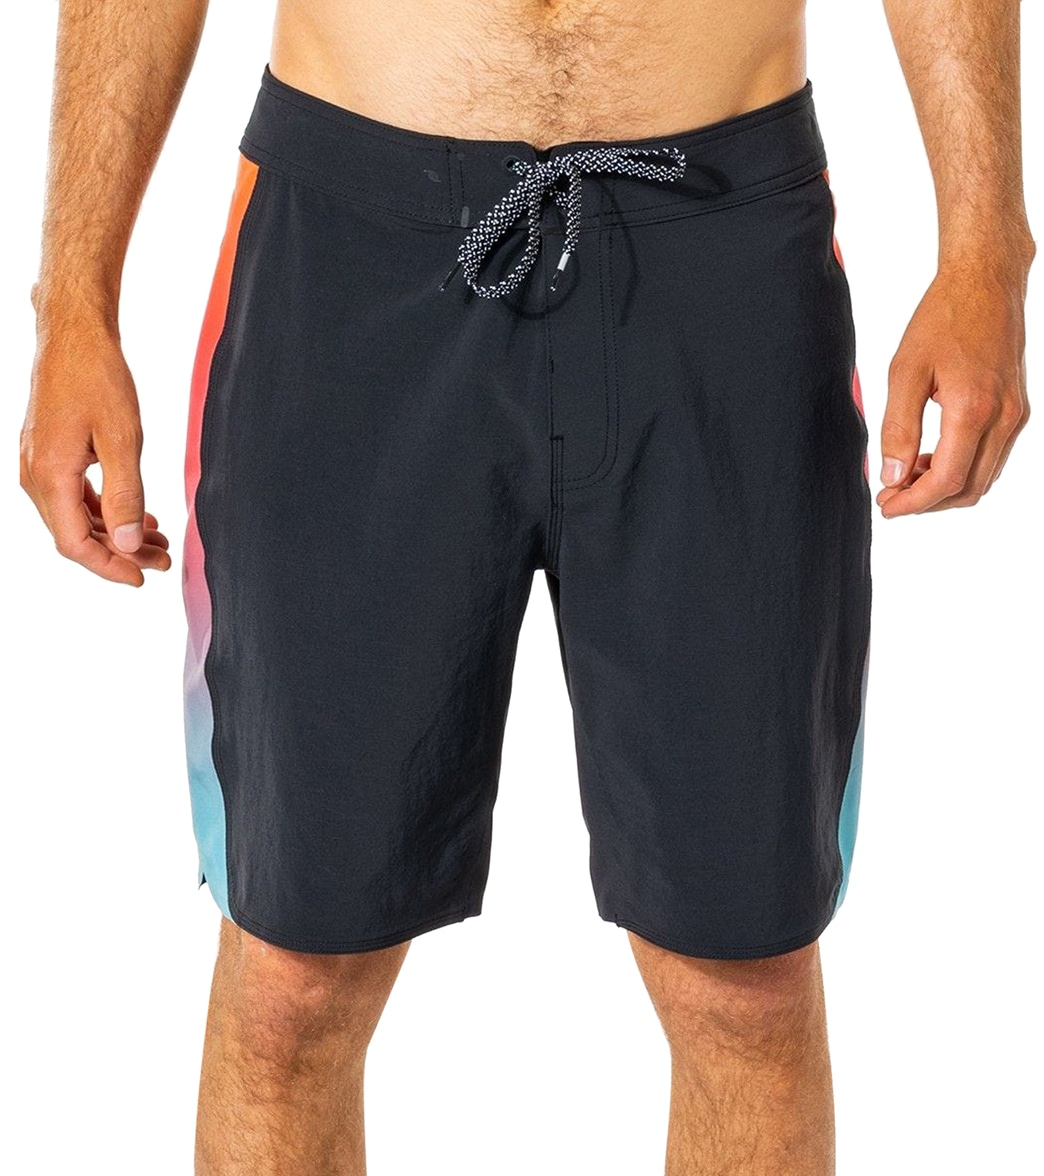 Rip Curl Men's 19 Mirage 3/2/1 Ultimate Boardshorts - Baltic Teal 28 - Swimoutlet.com